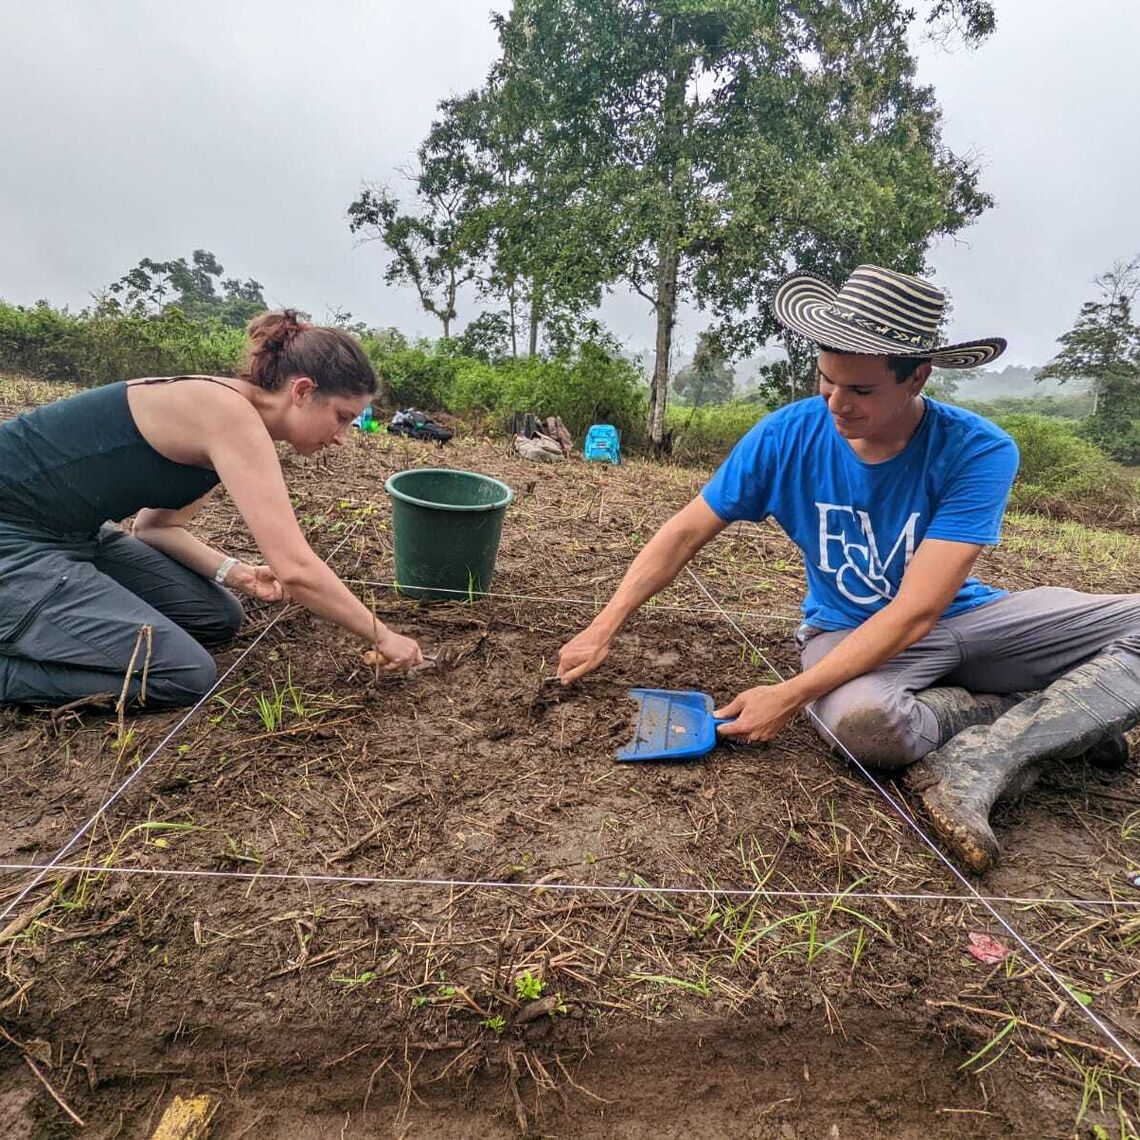 "I've been able to not only apply firsthand anthropological concepts and archaeological theory I learned at F&M to study the Early Formative Period Valdivia (3800-1450 BC), but gain invaluable excavation and laboratory analysis experience," said Rojas (on the right).